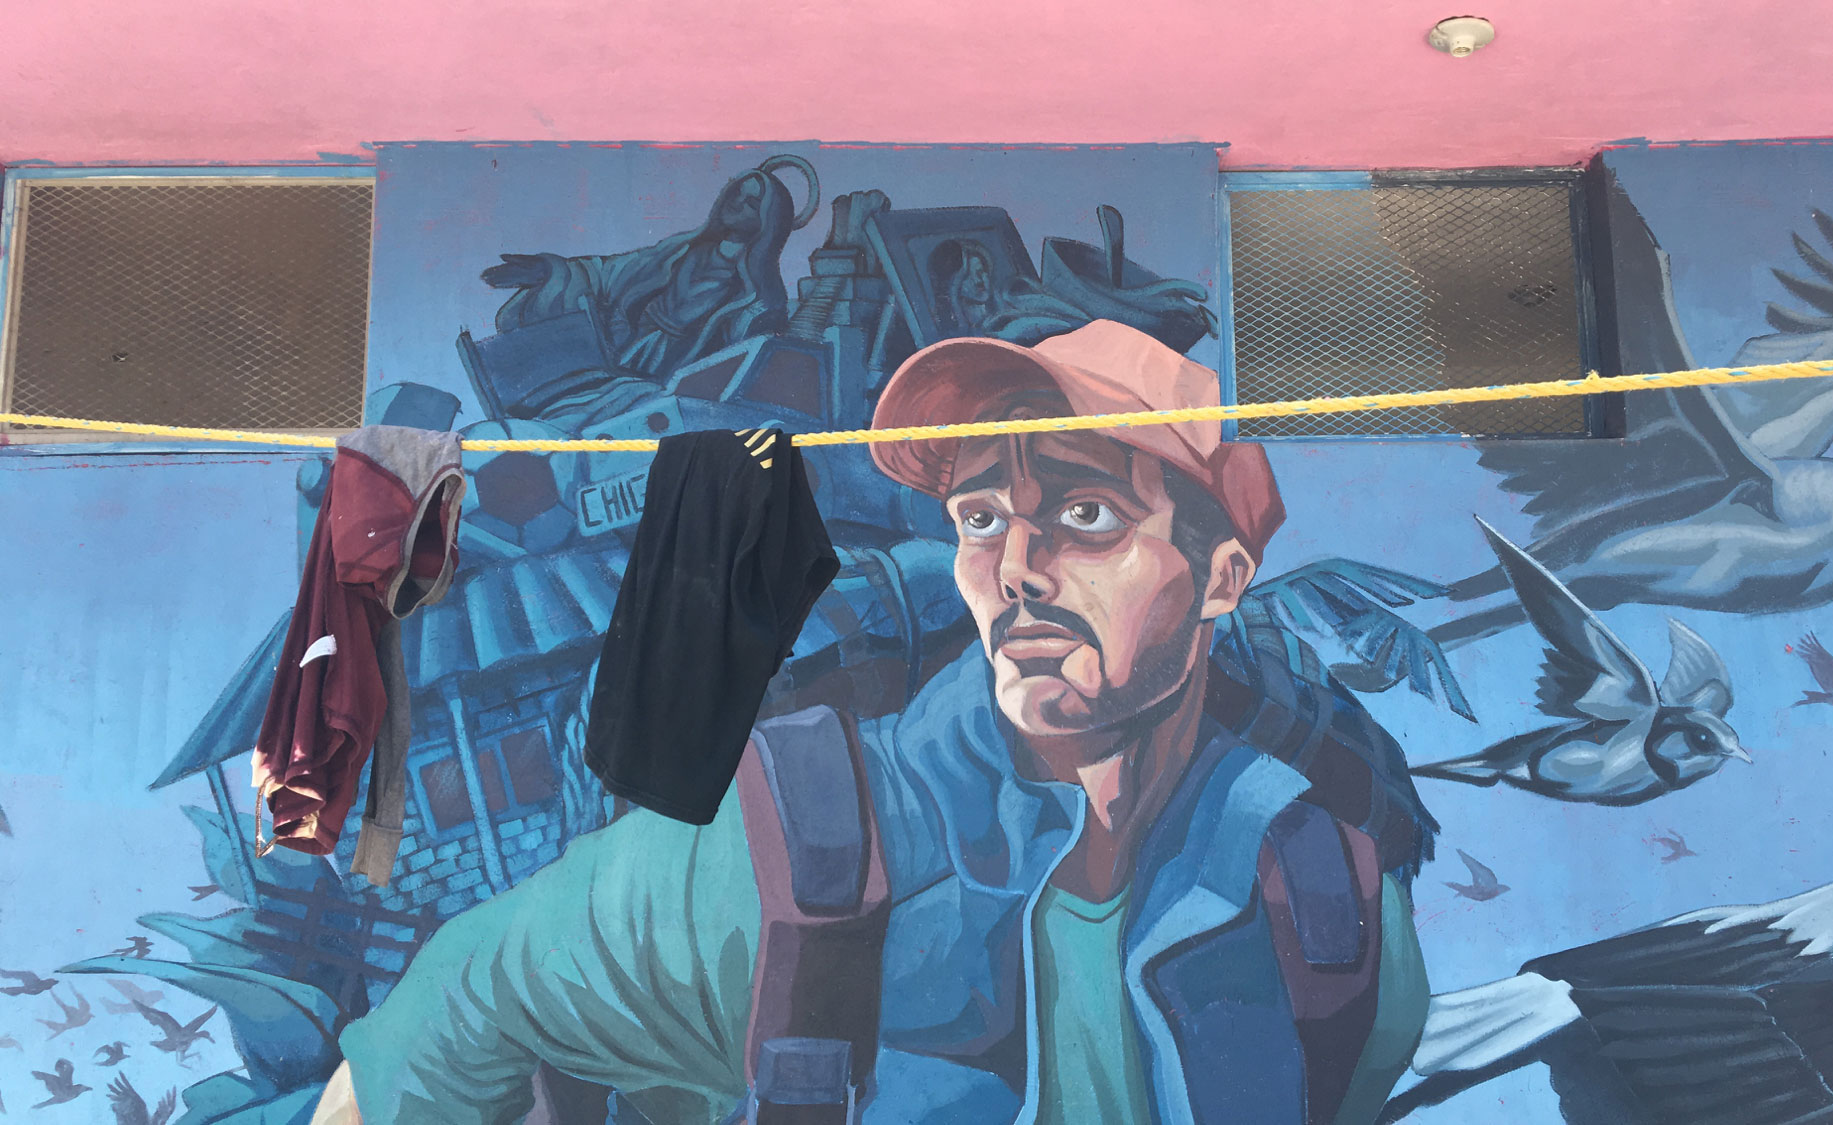 Clothes hang in front of a mural depicting a male migrant